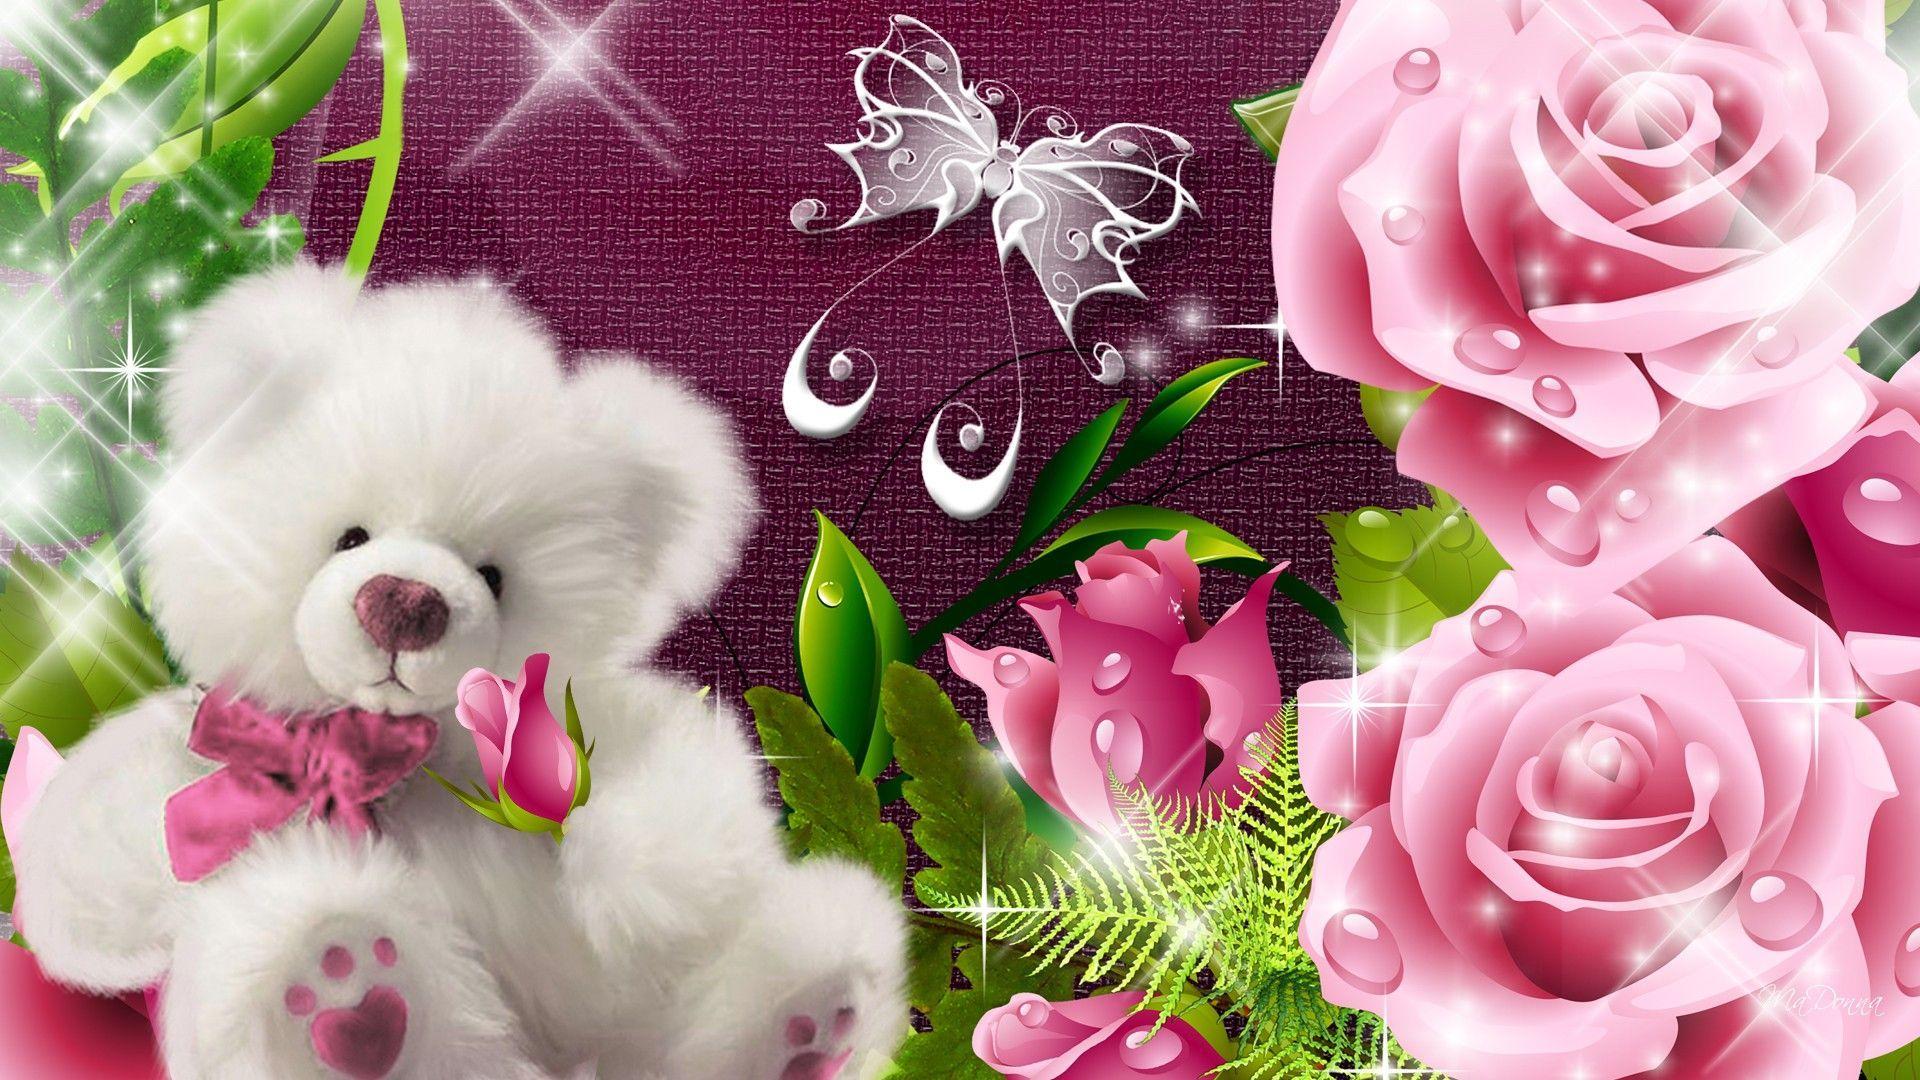 Pink Roses Live Wallpaper - Apps on Google Play